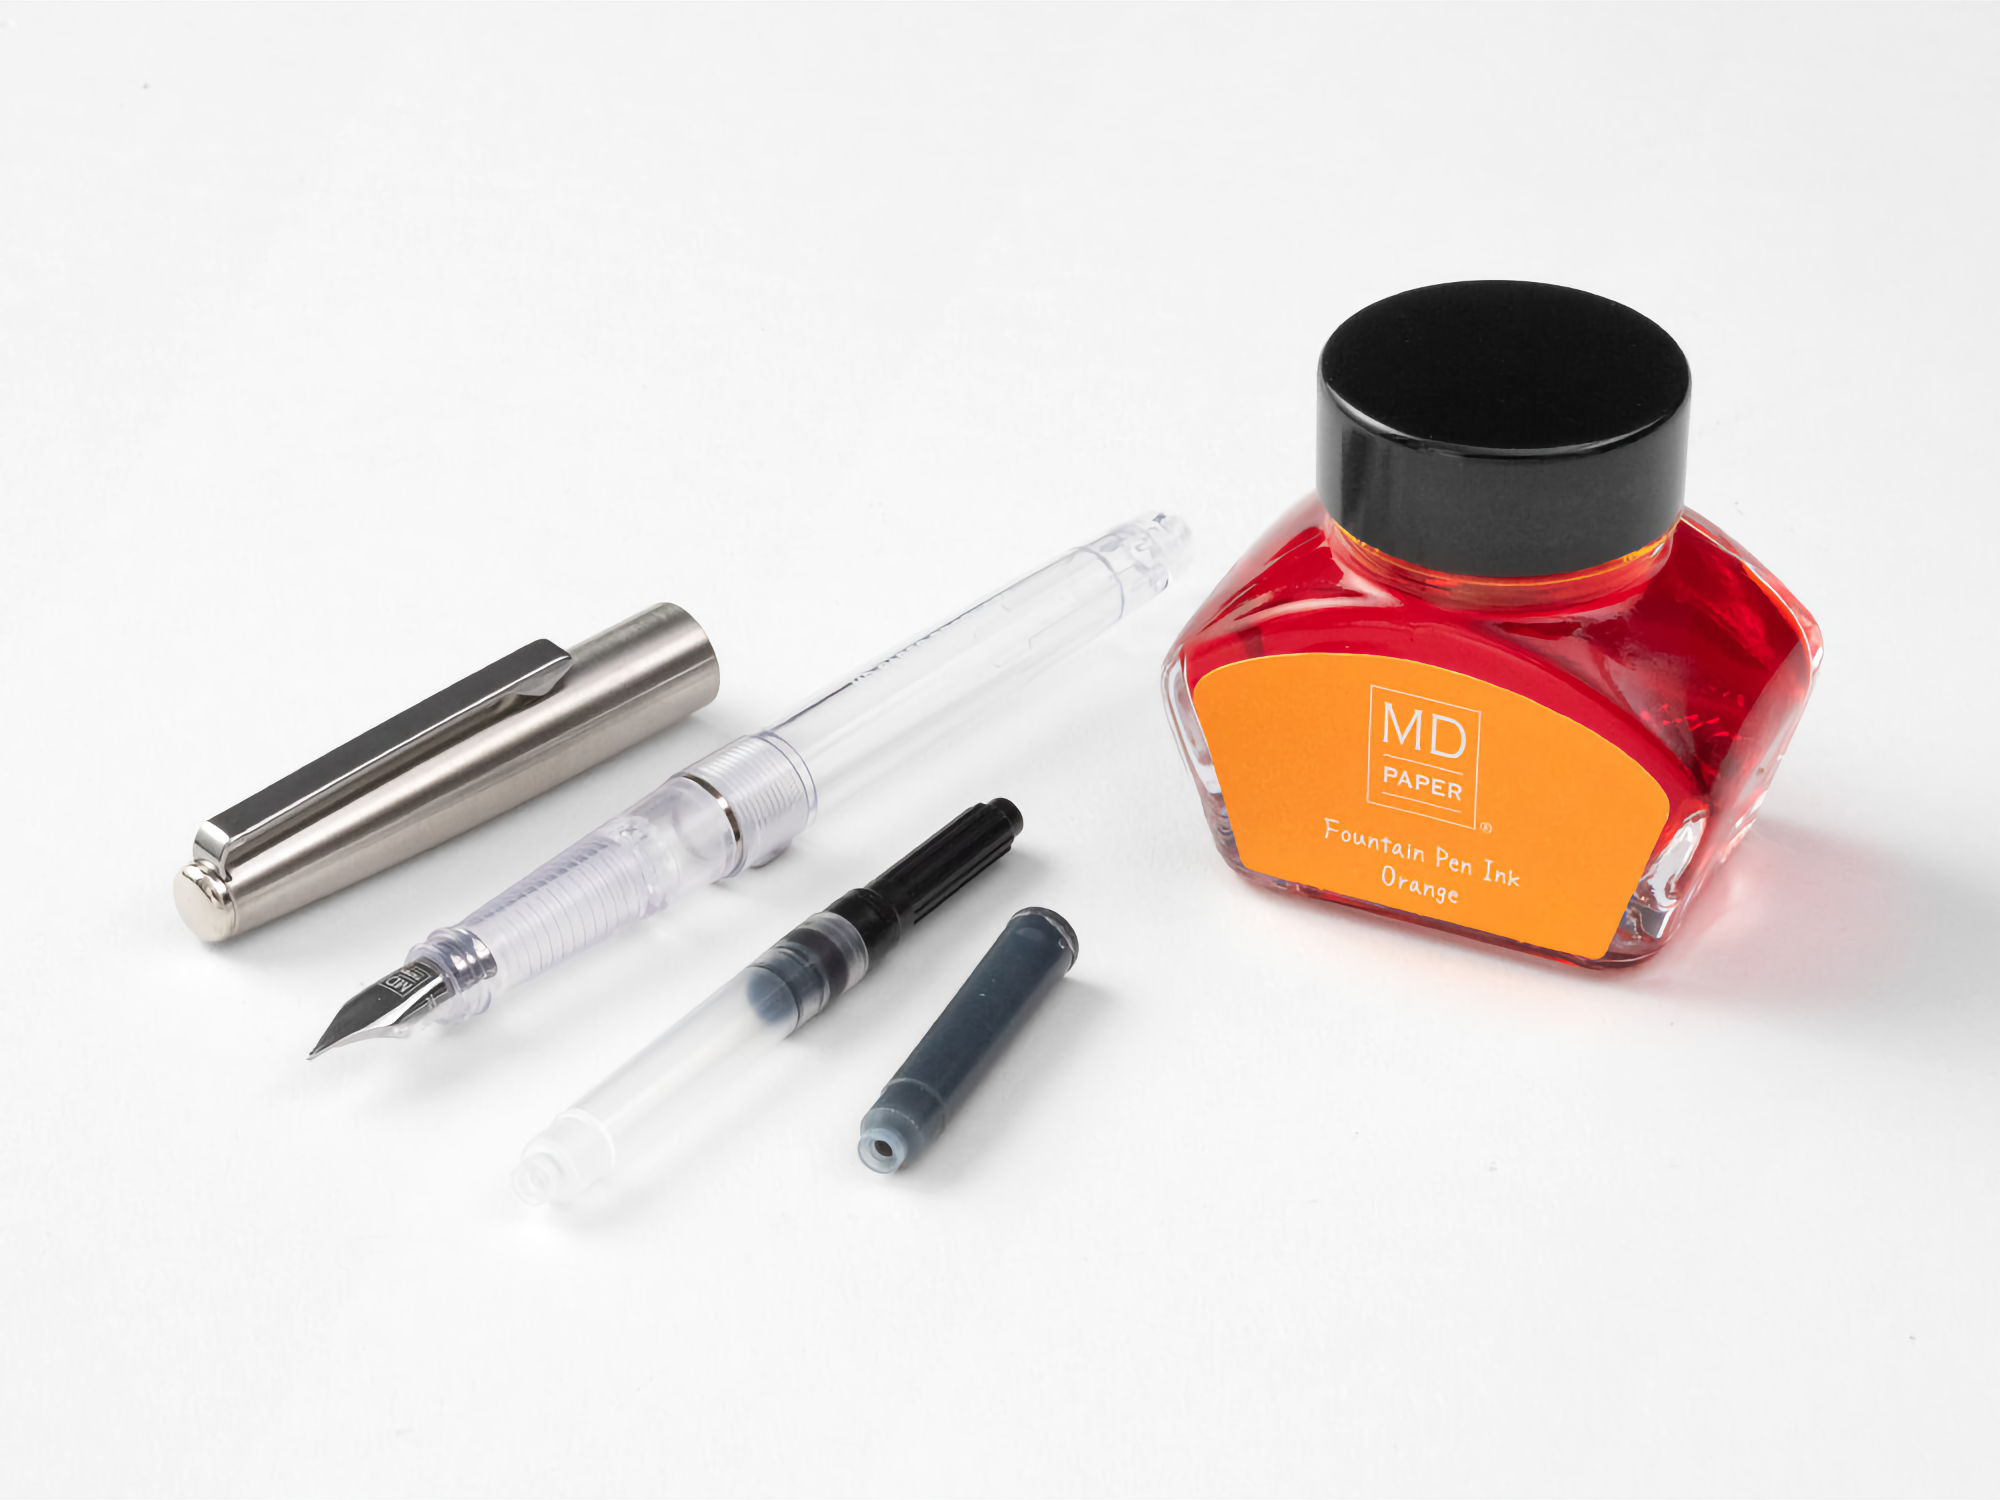 Midori MD Fountain Pen With Bottled Ink Orange [LIMITED EDITION]